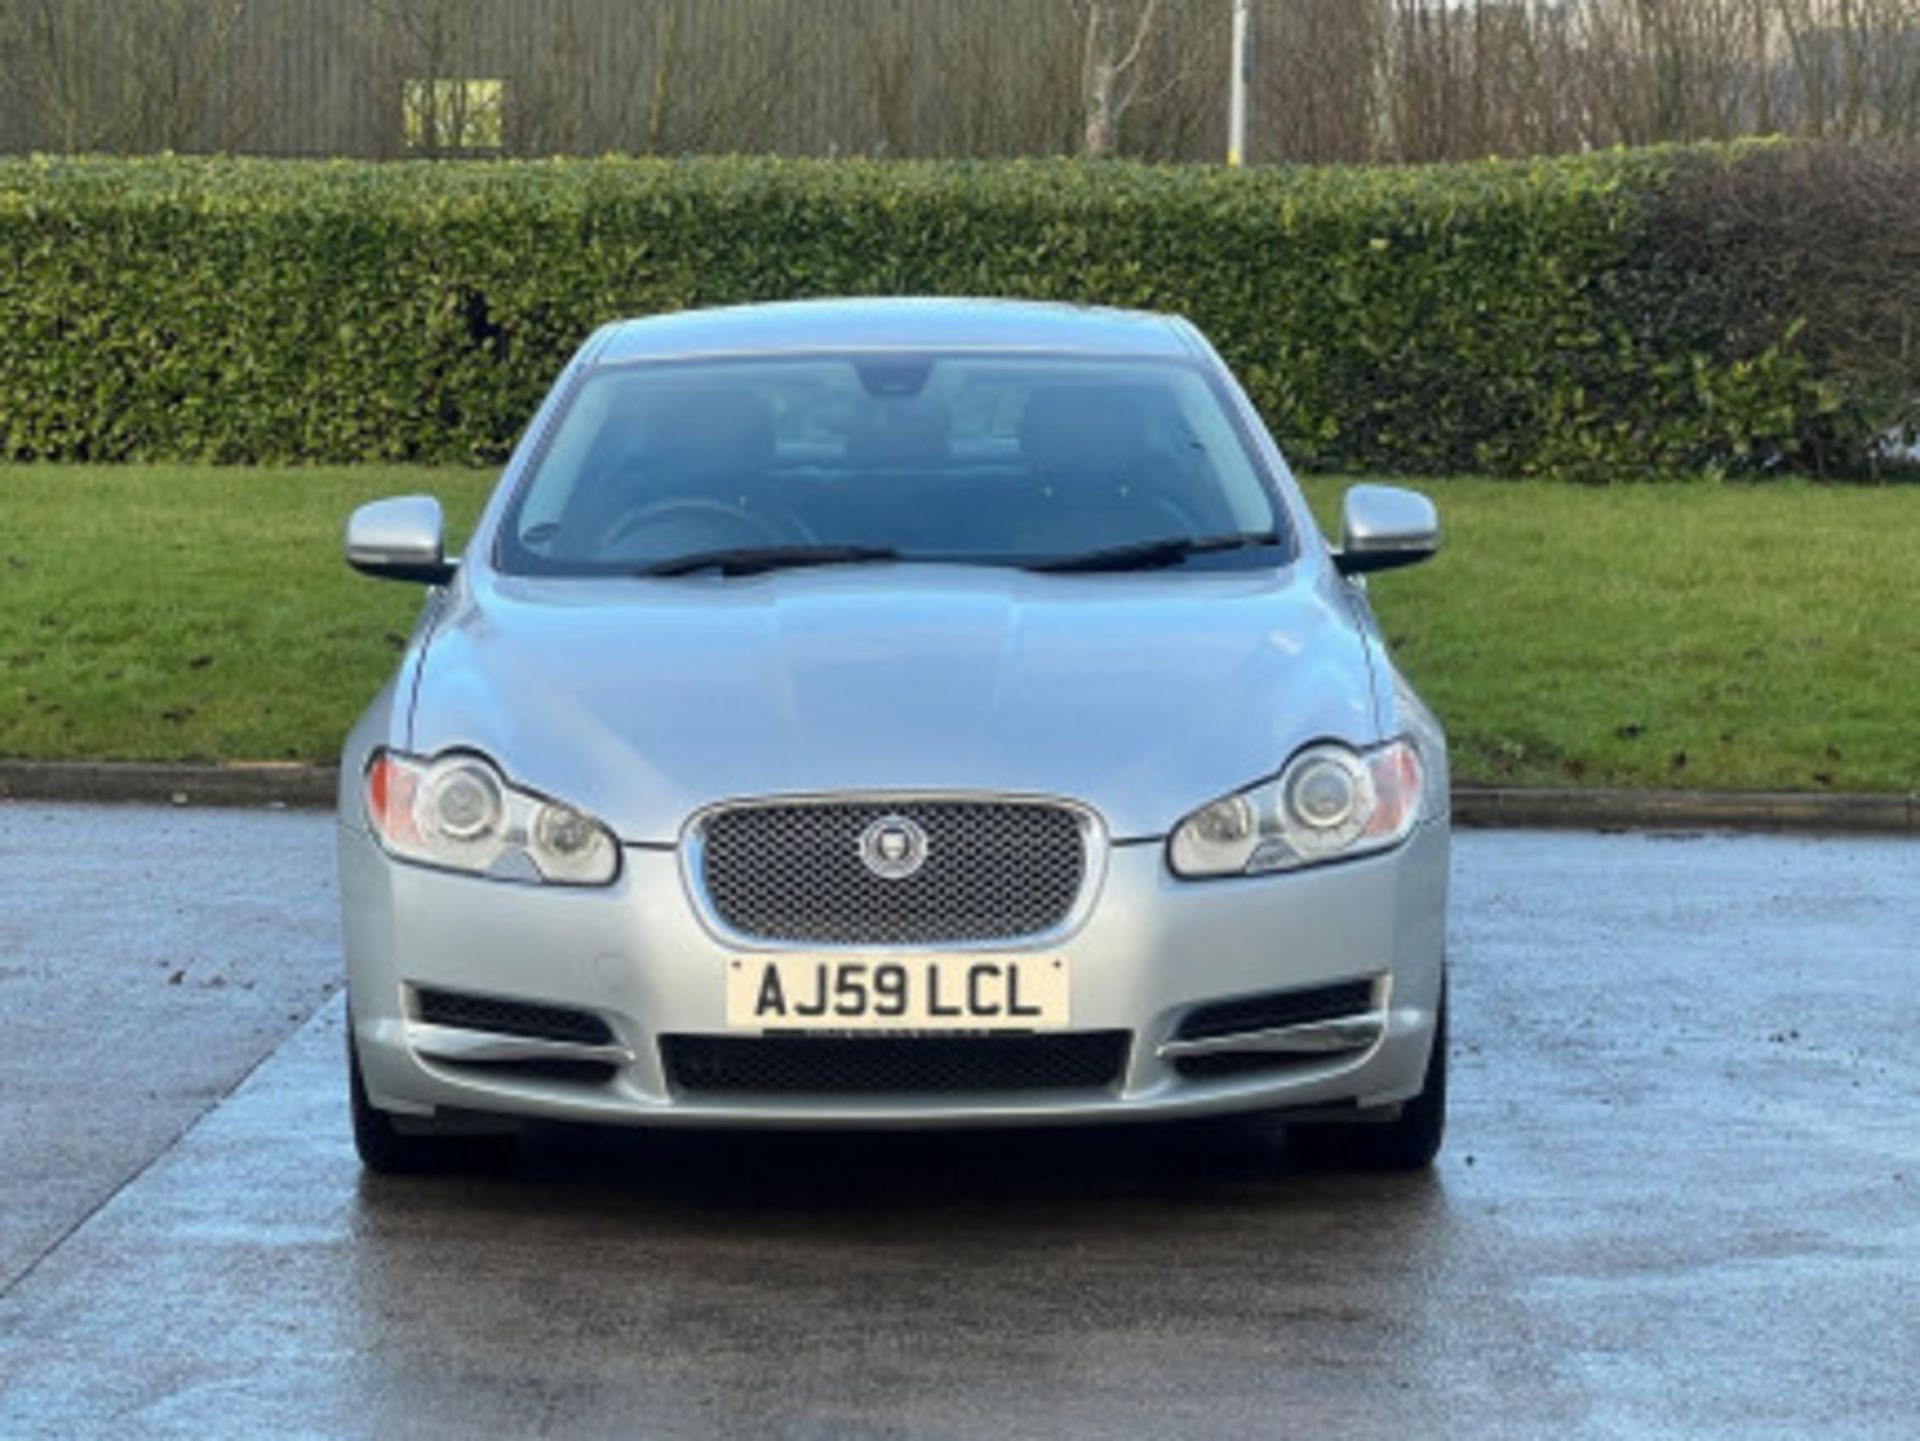 LUXURIOUS JAGUAR XF 3.0D V6 LUXURY 4DR AUTOMATIC SALOON >>--NO VAT ON HAMMER--<< - Image 40 of 80